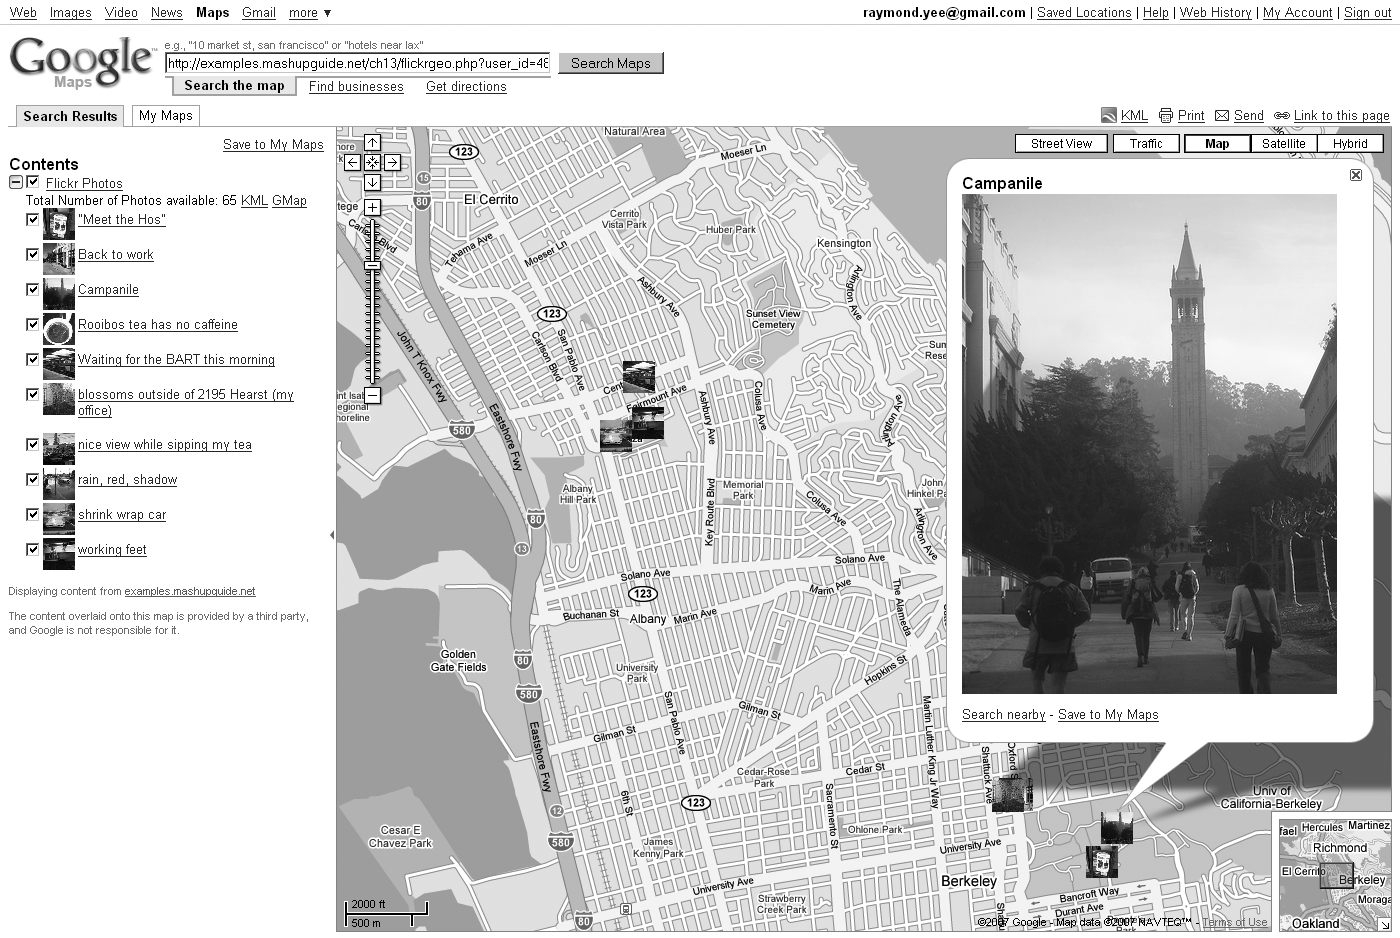 Flickr photos displayed in Google Maps via a KML feed